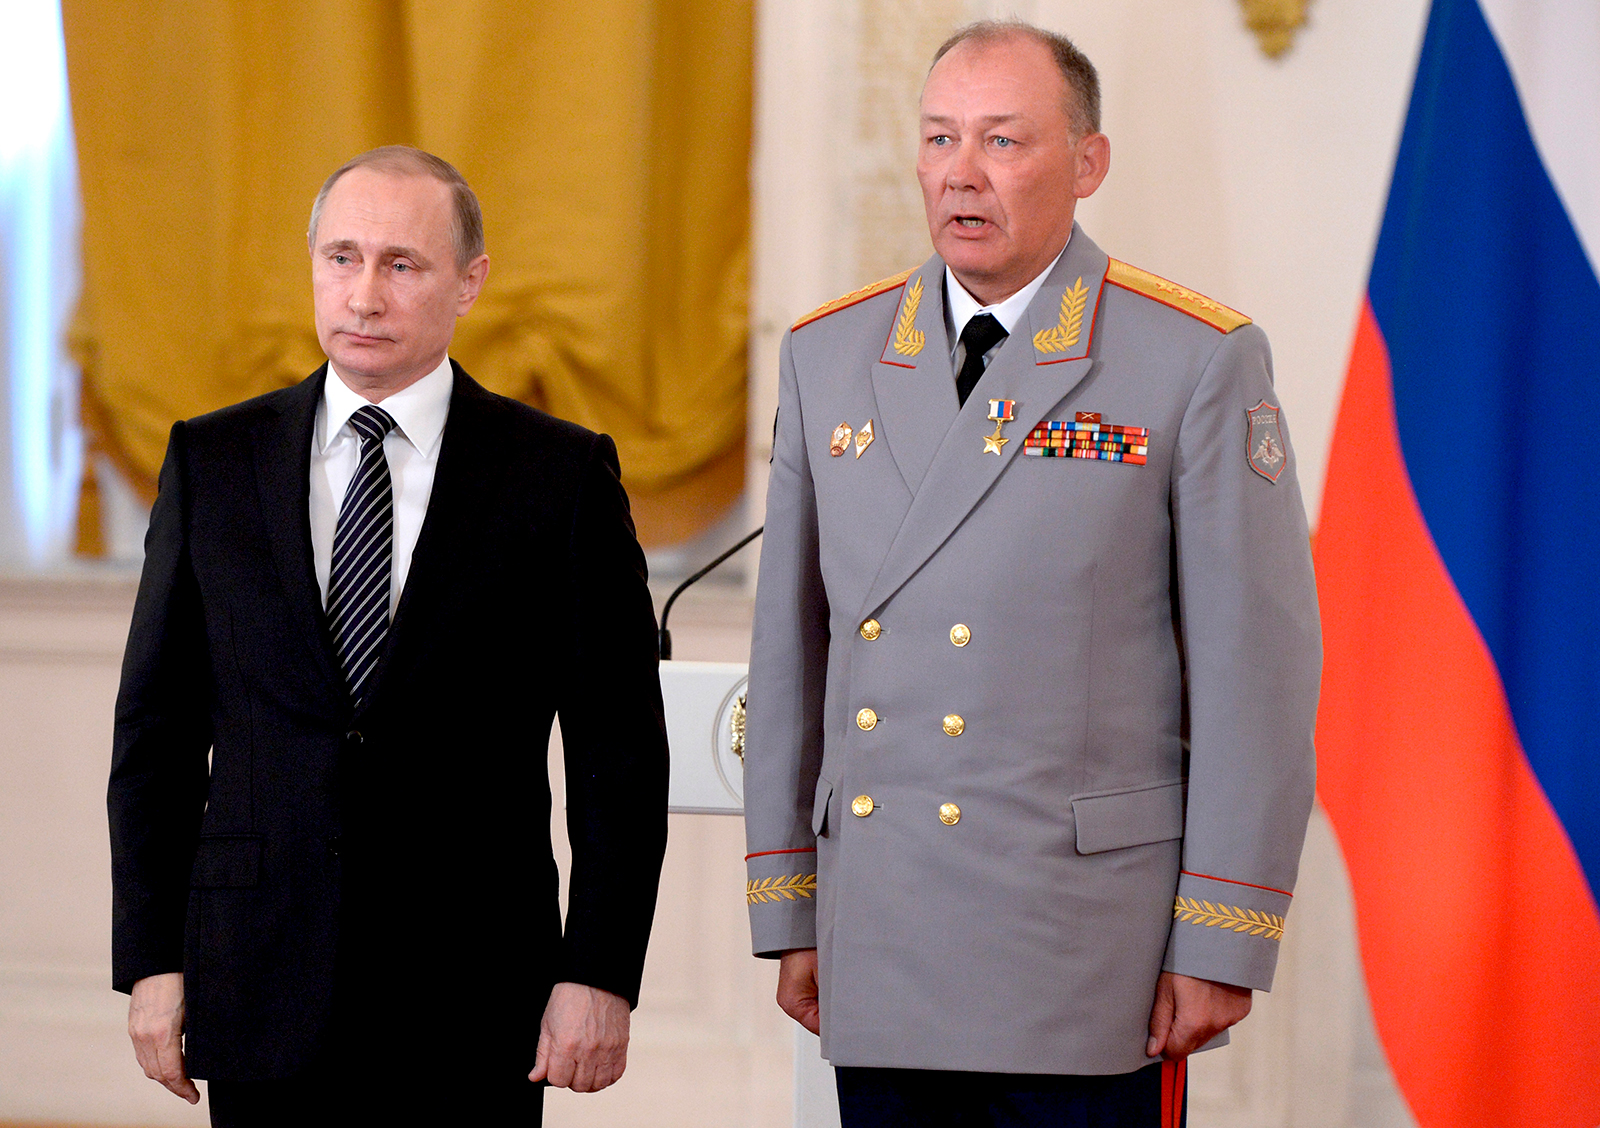 In this swimming pool photo taken on Thursday, March 17, 2016, Russian President Vladimir Putin, left, poses with General Alexander Dvornikov during an awards ceremony in the Kremlin in Moscow, Russia. 